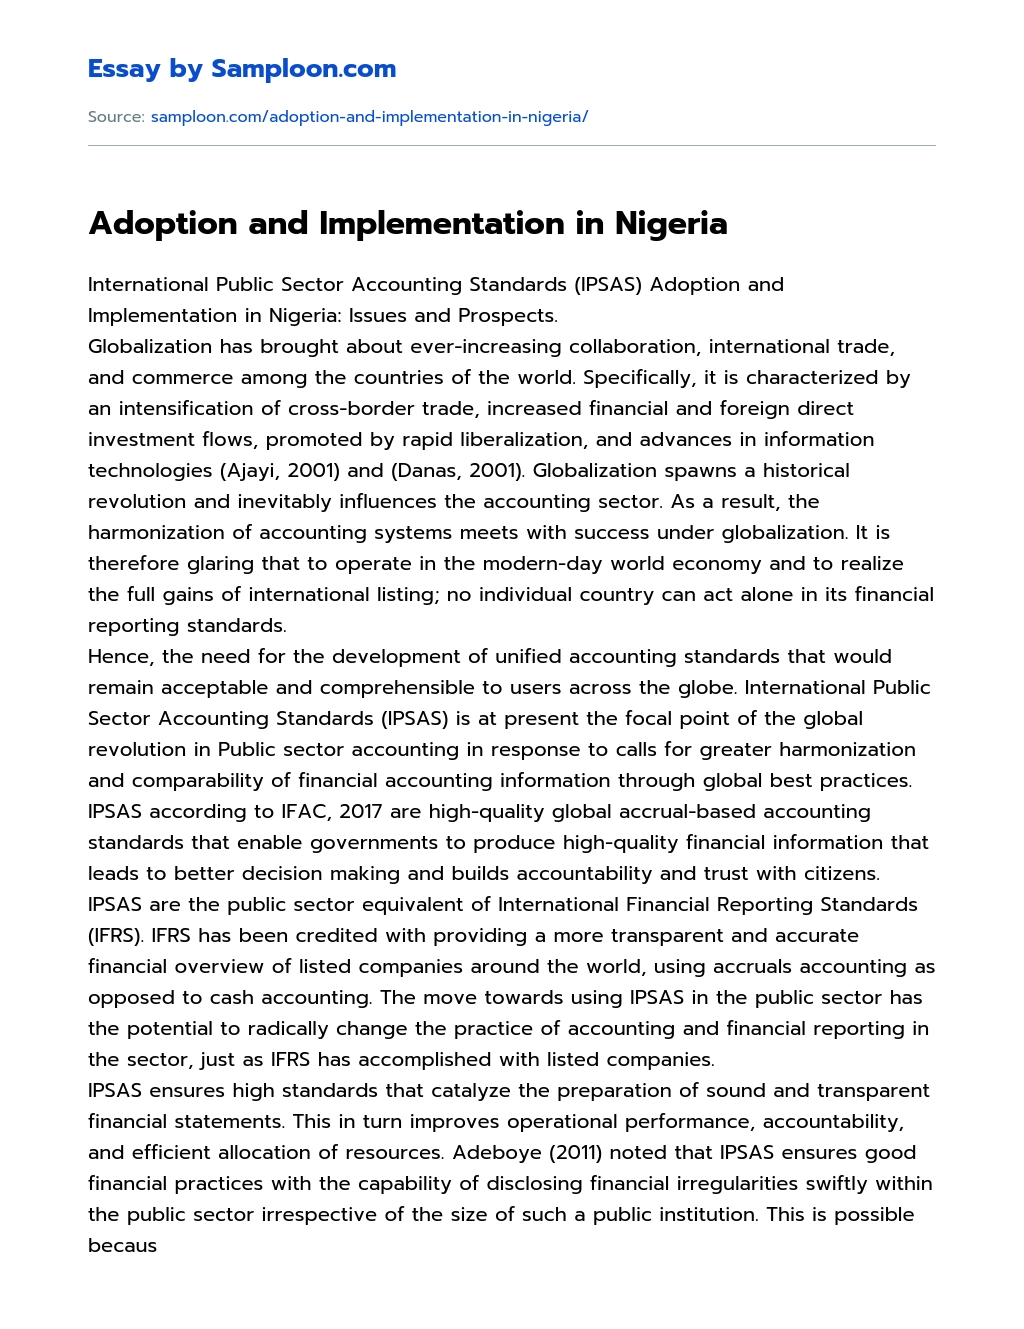 Adoption and Implementation in Nigeria essay